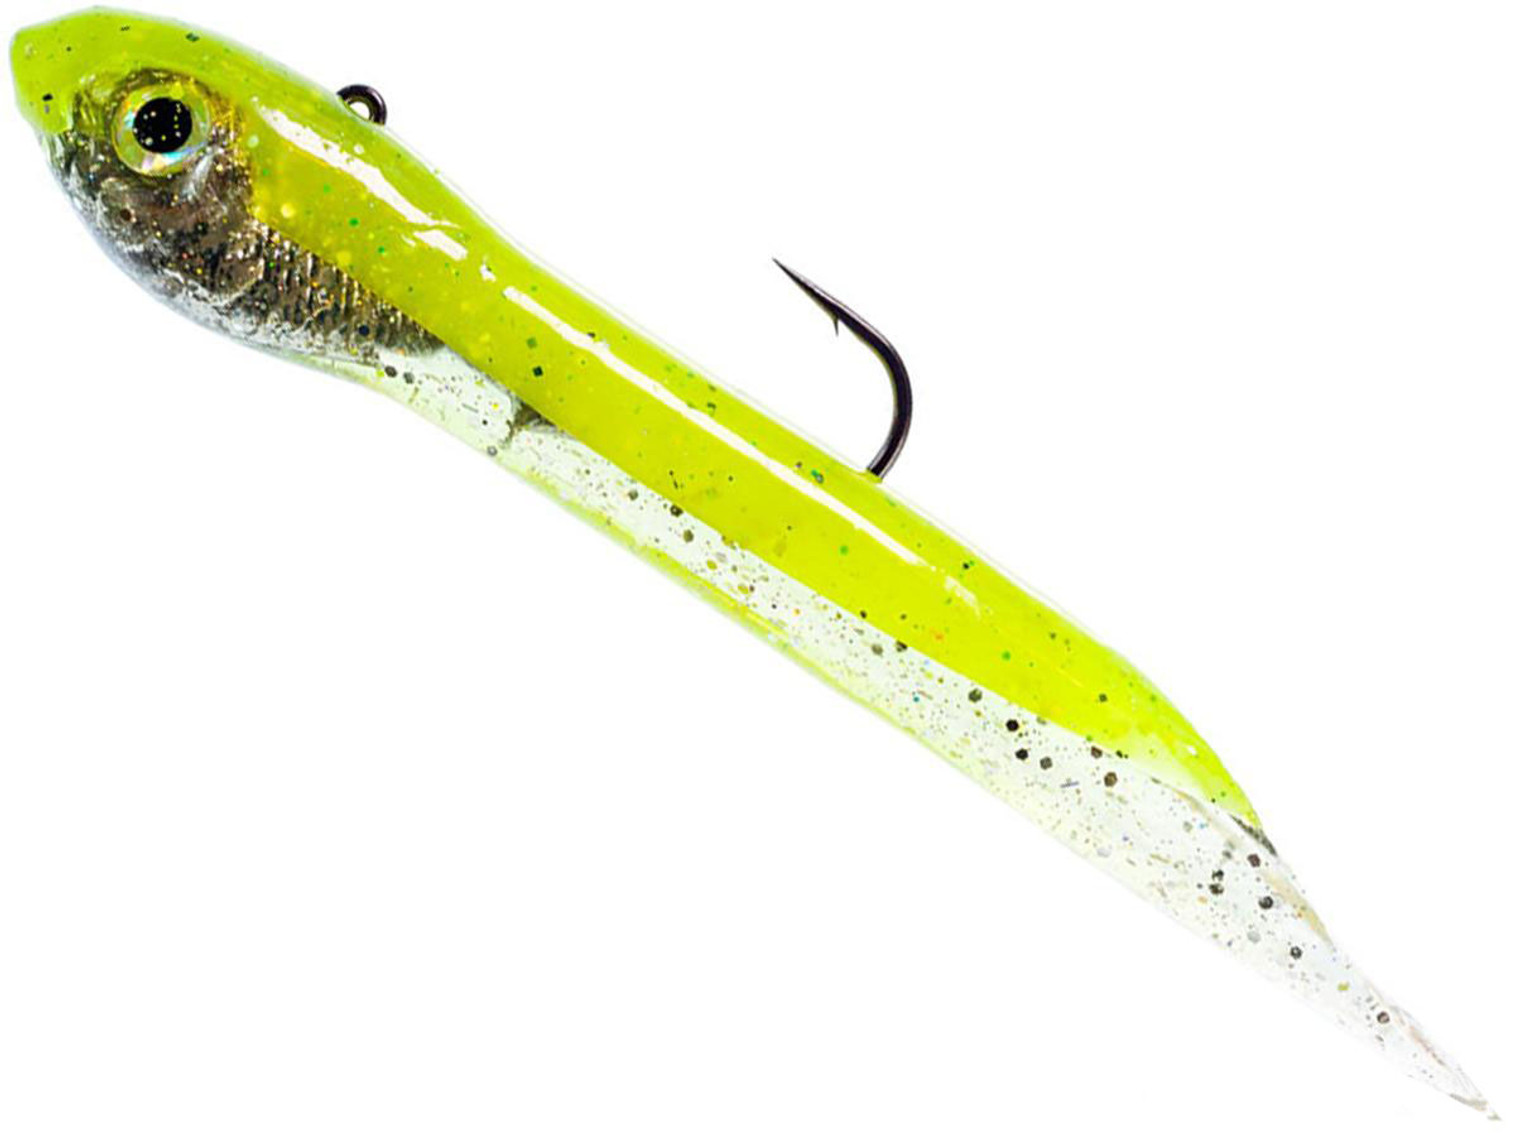 Hook Up Baits Handcrafted Soft Fishing Jigs - Glow Green Silver / 8" / 3 oz